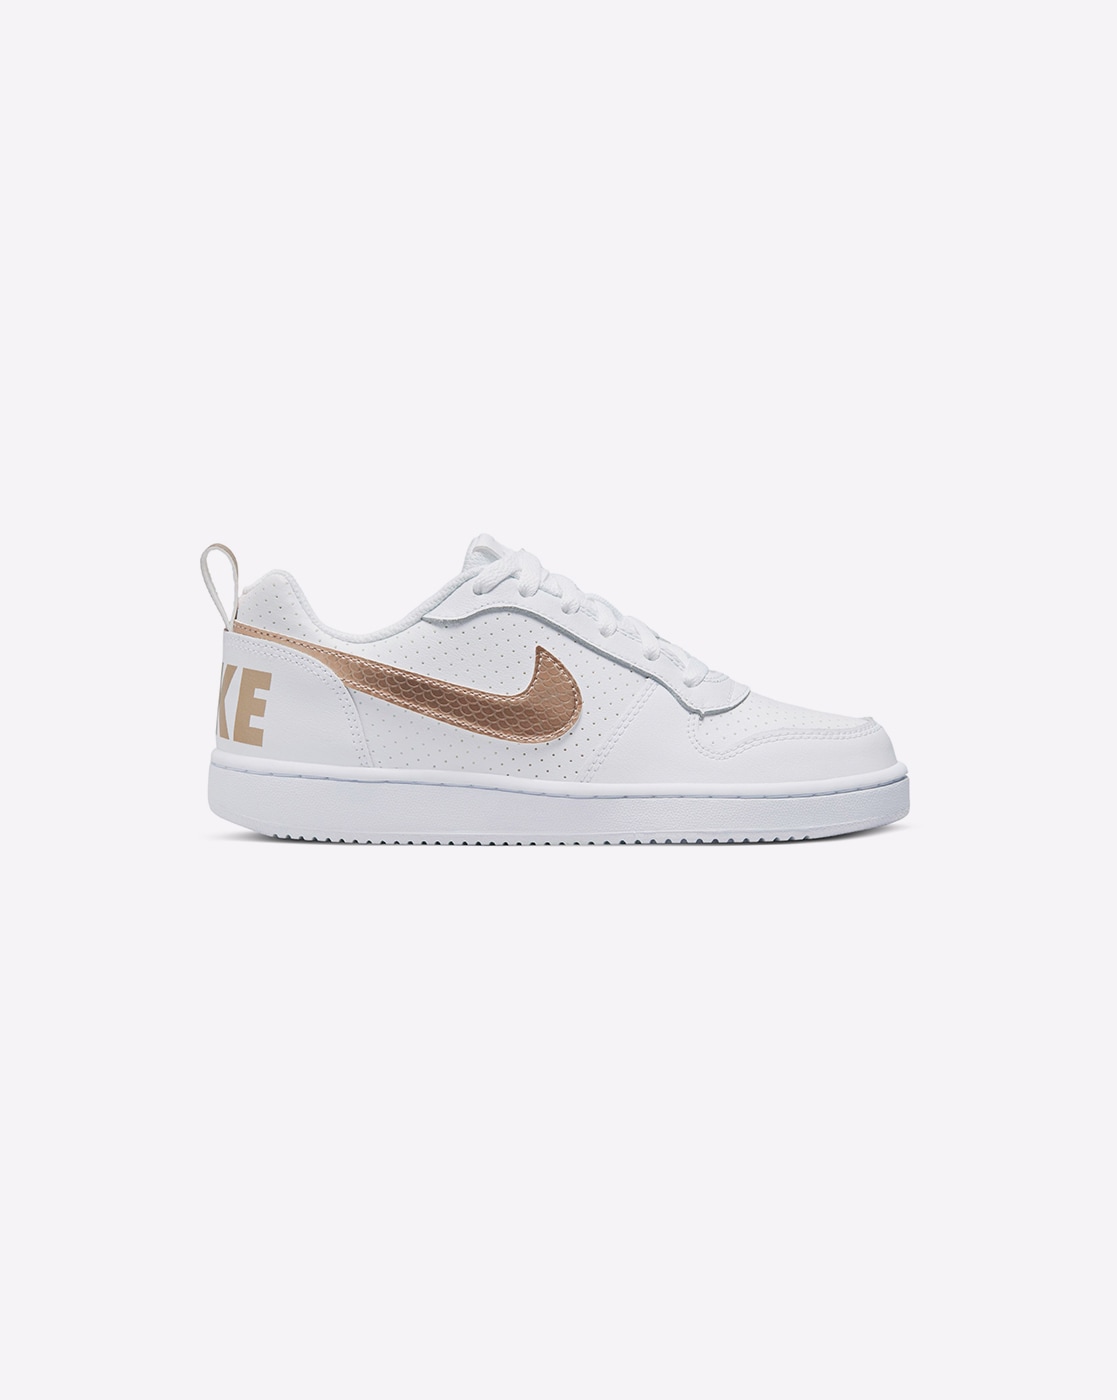 Discover 134+ girls white nike sneakers